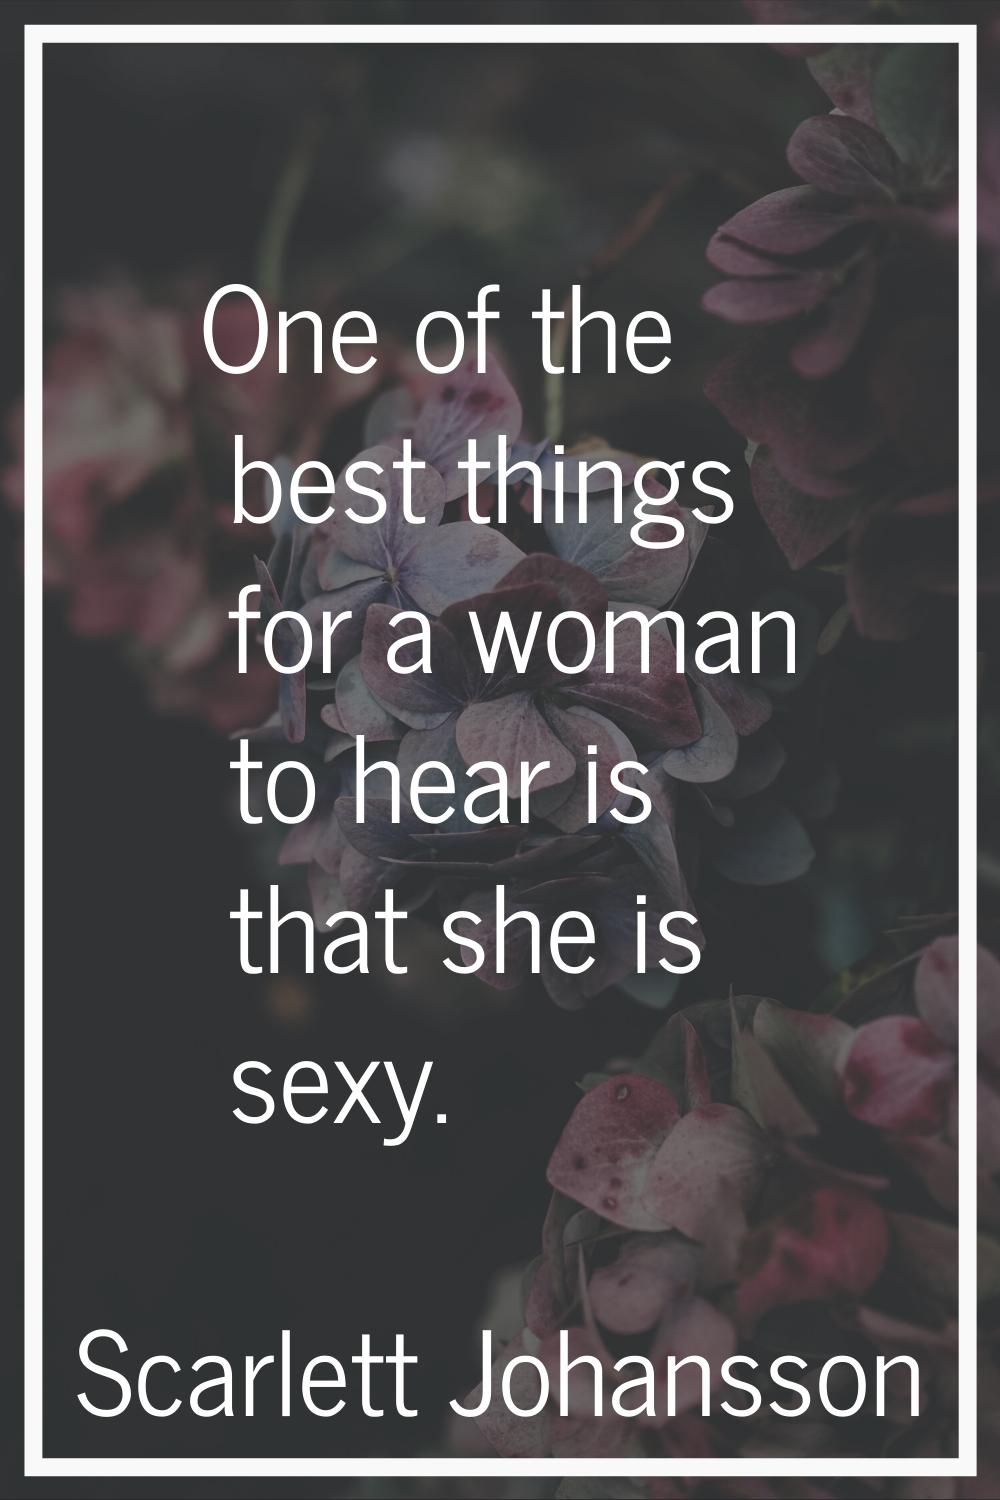 One of the best things for a woman to hear is that she is sexy.